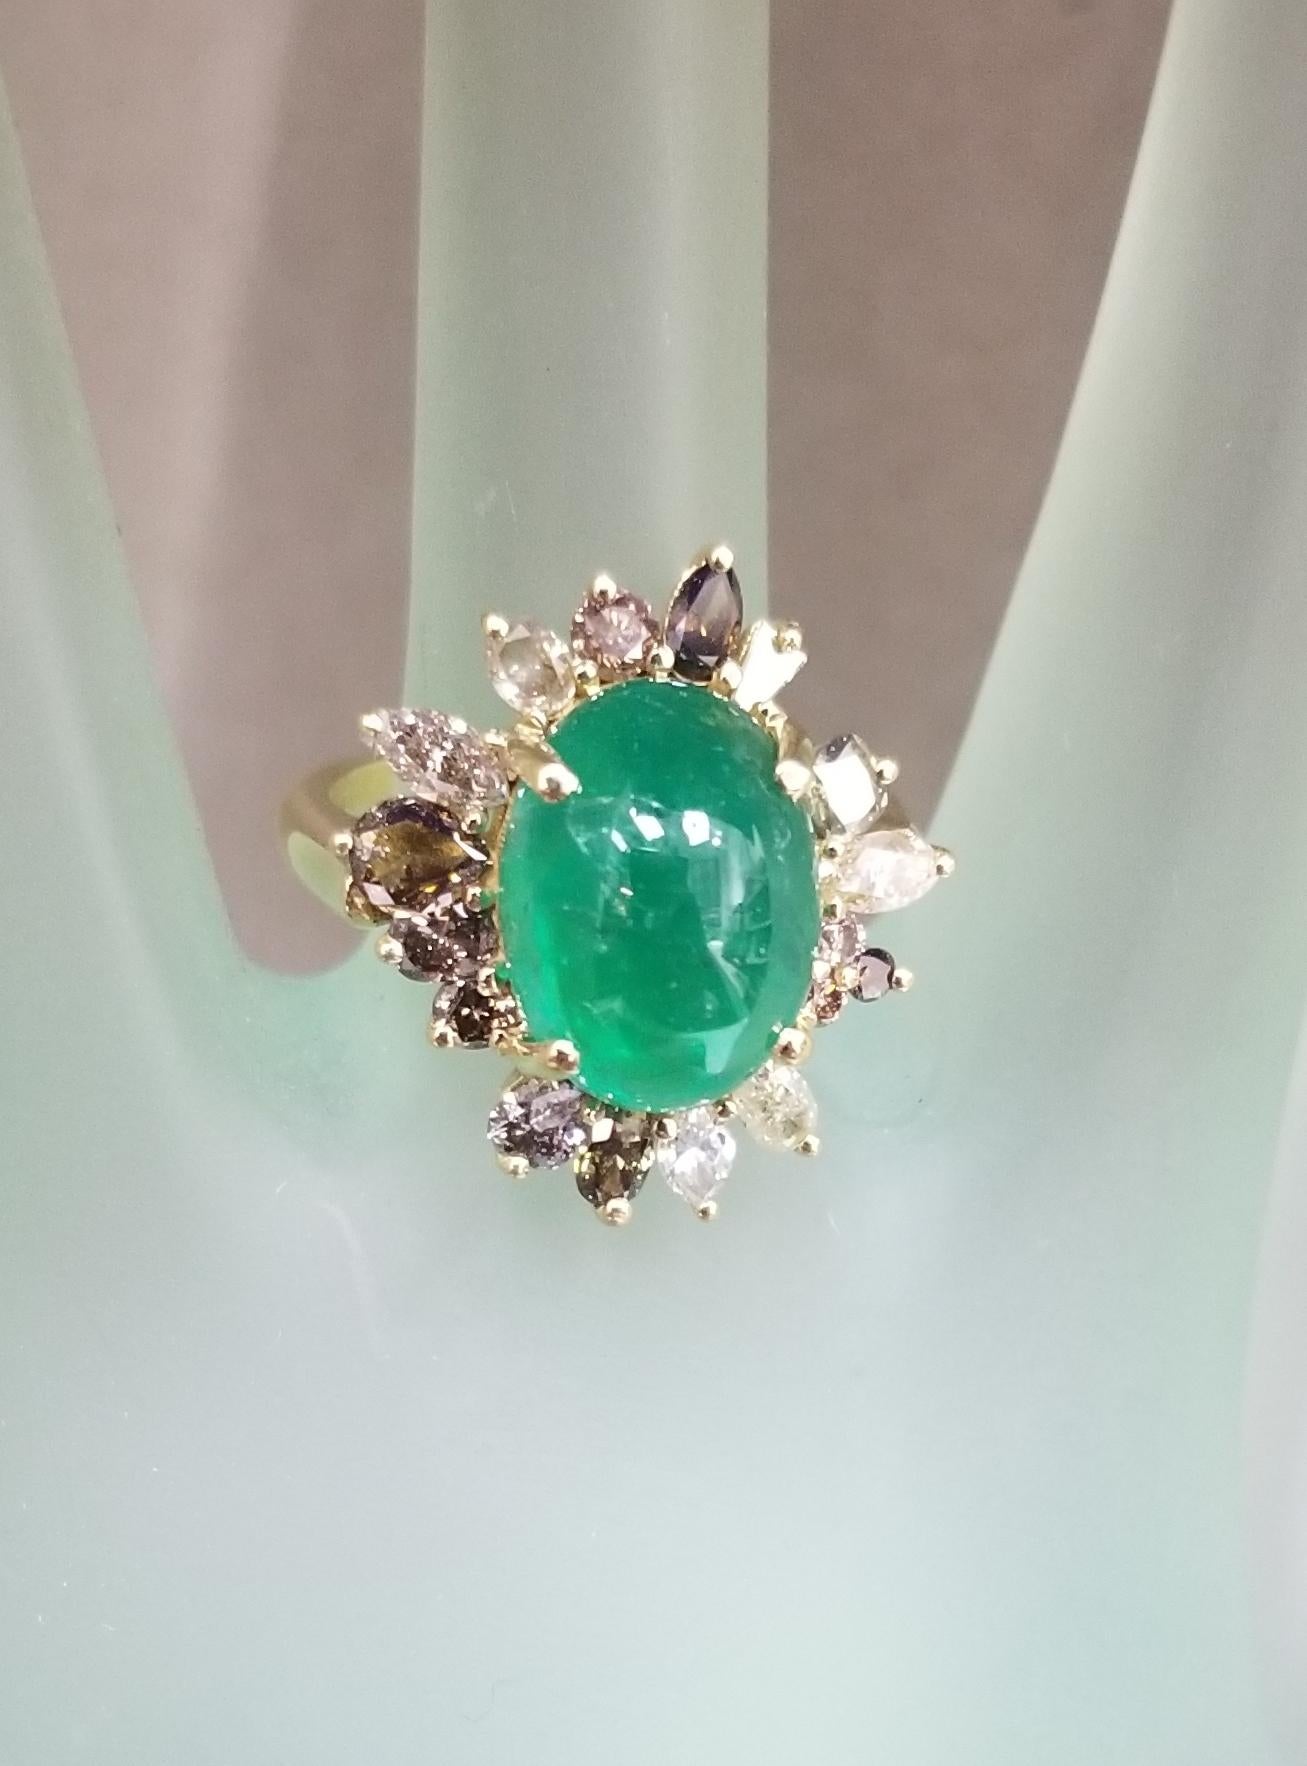 Natural White, Yellow and Brown Diamonds Surrounding a Emerald 2